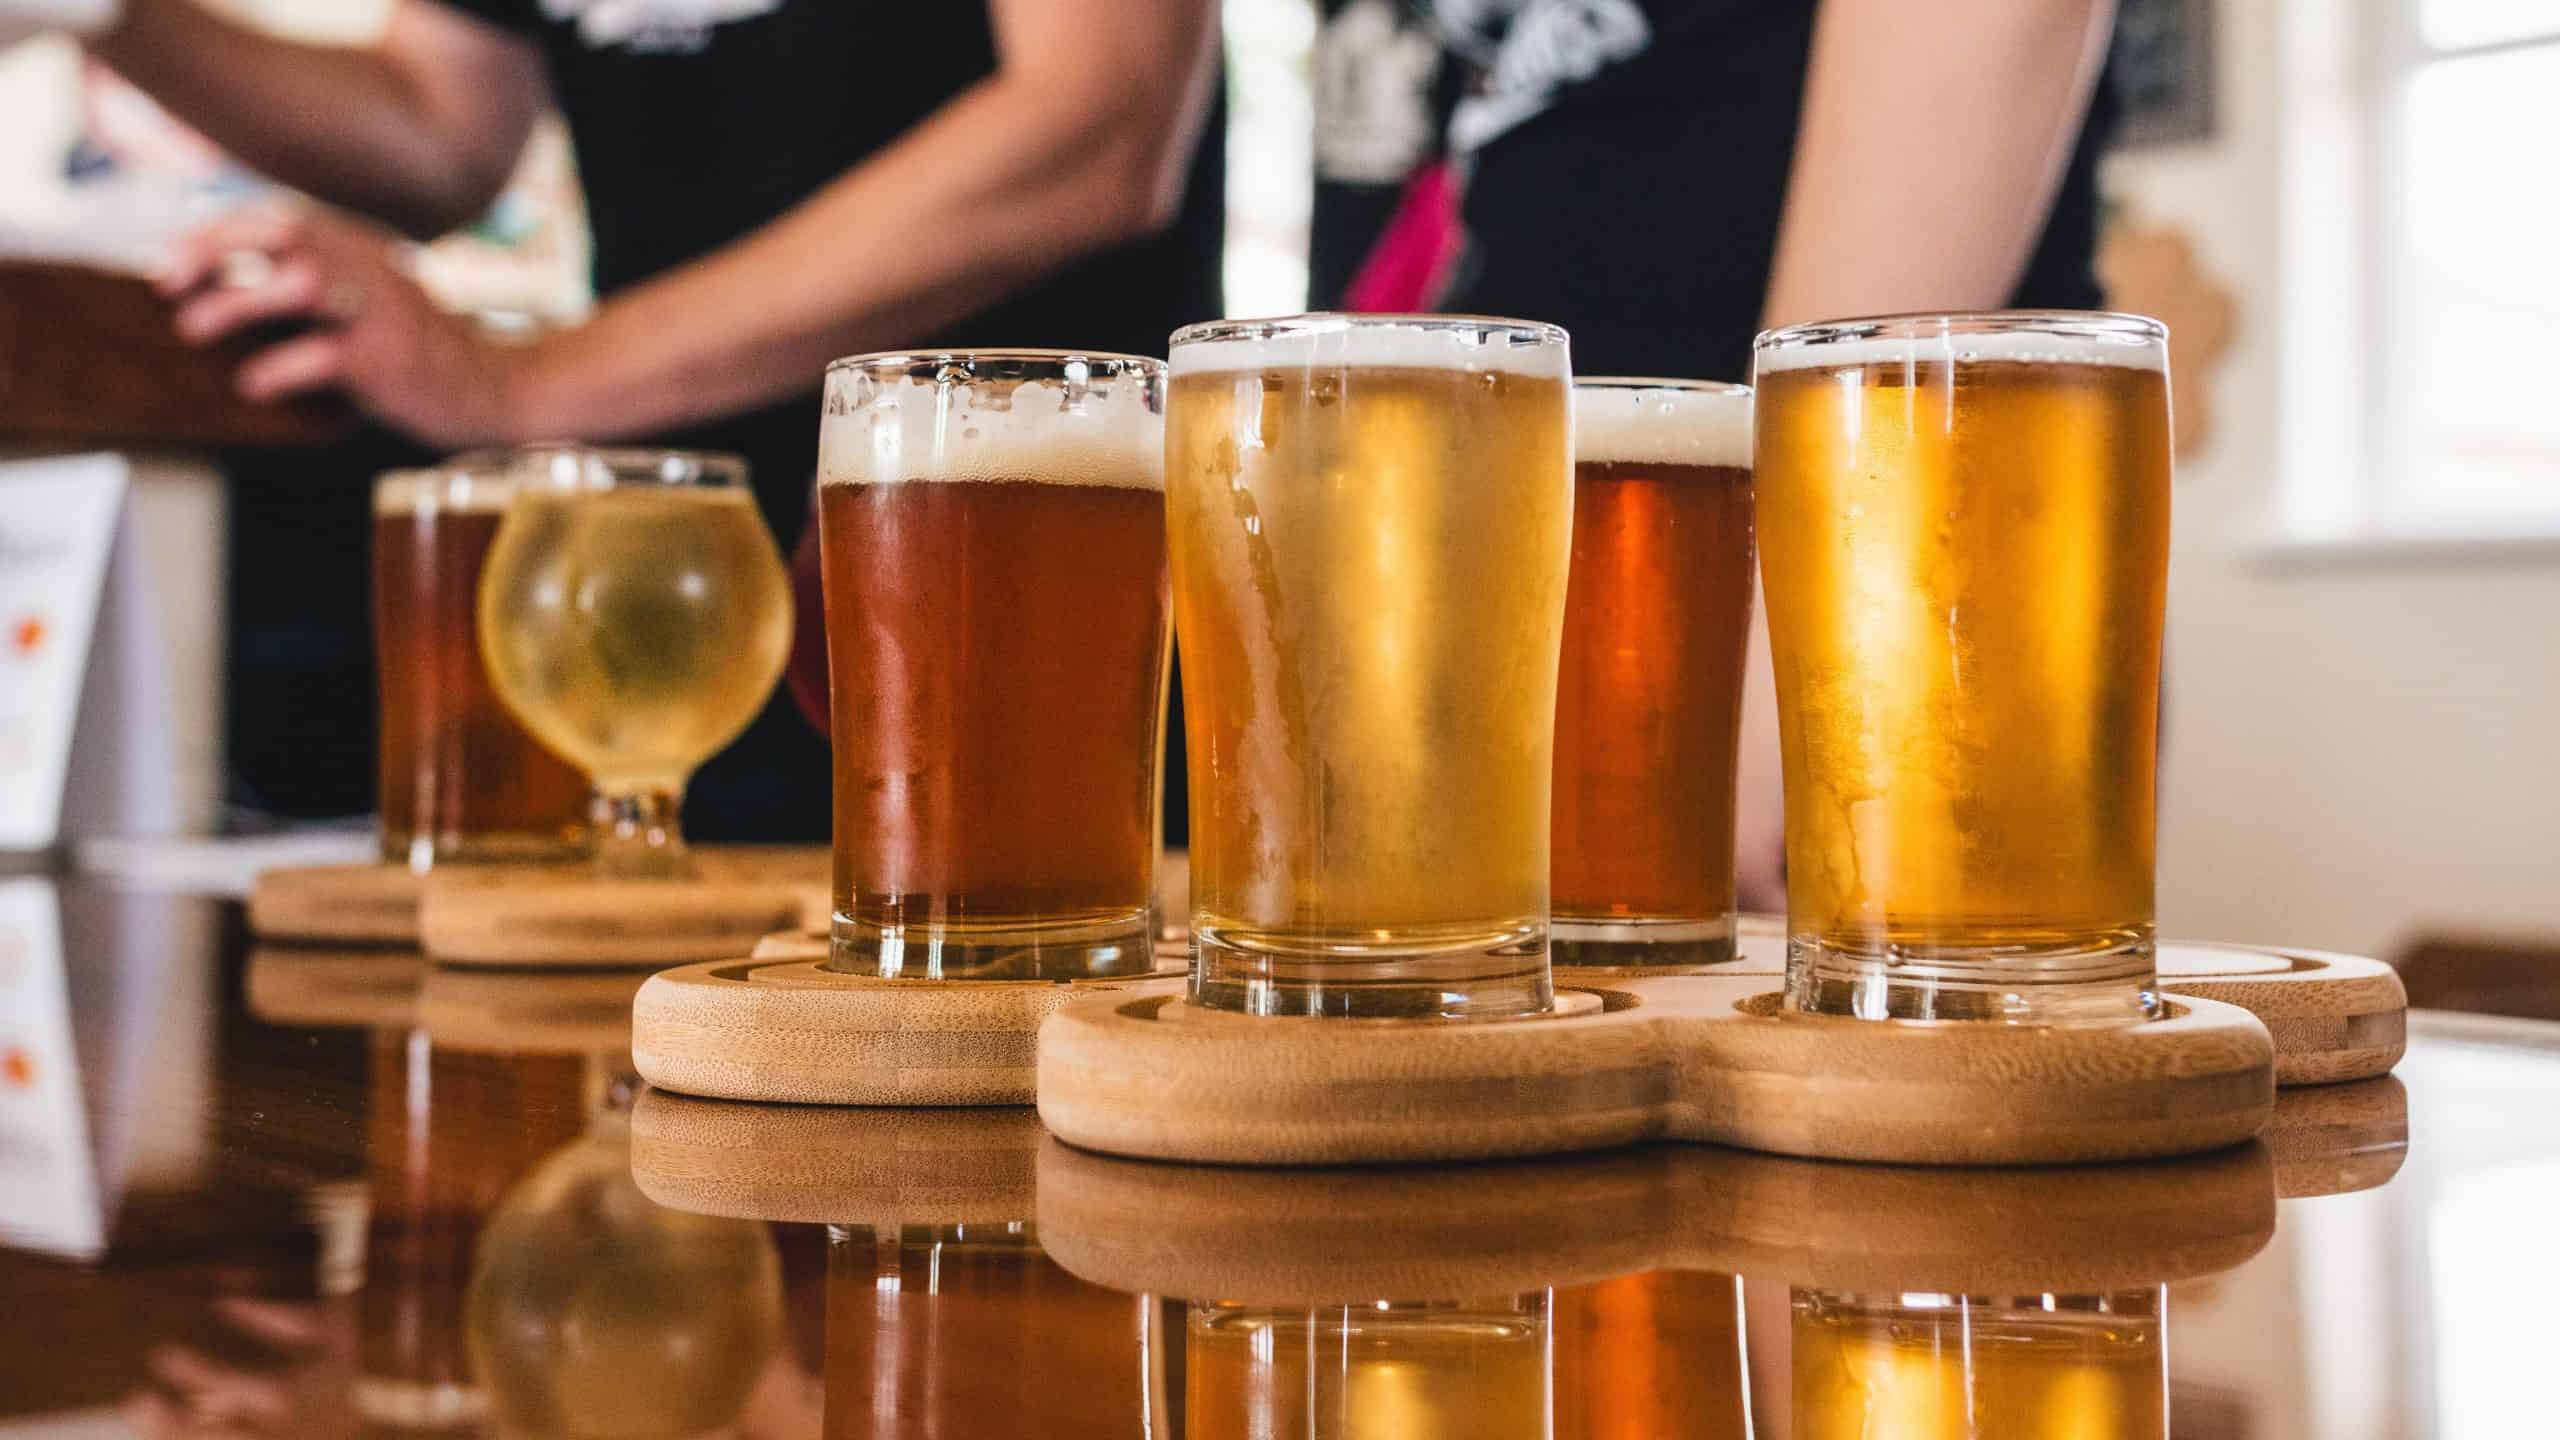 A row of beers on a wooden tray.